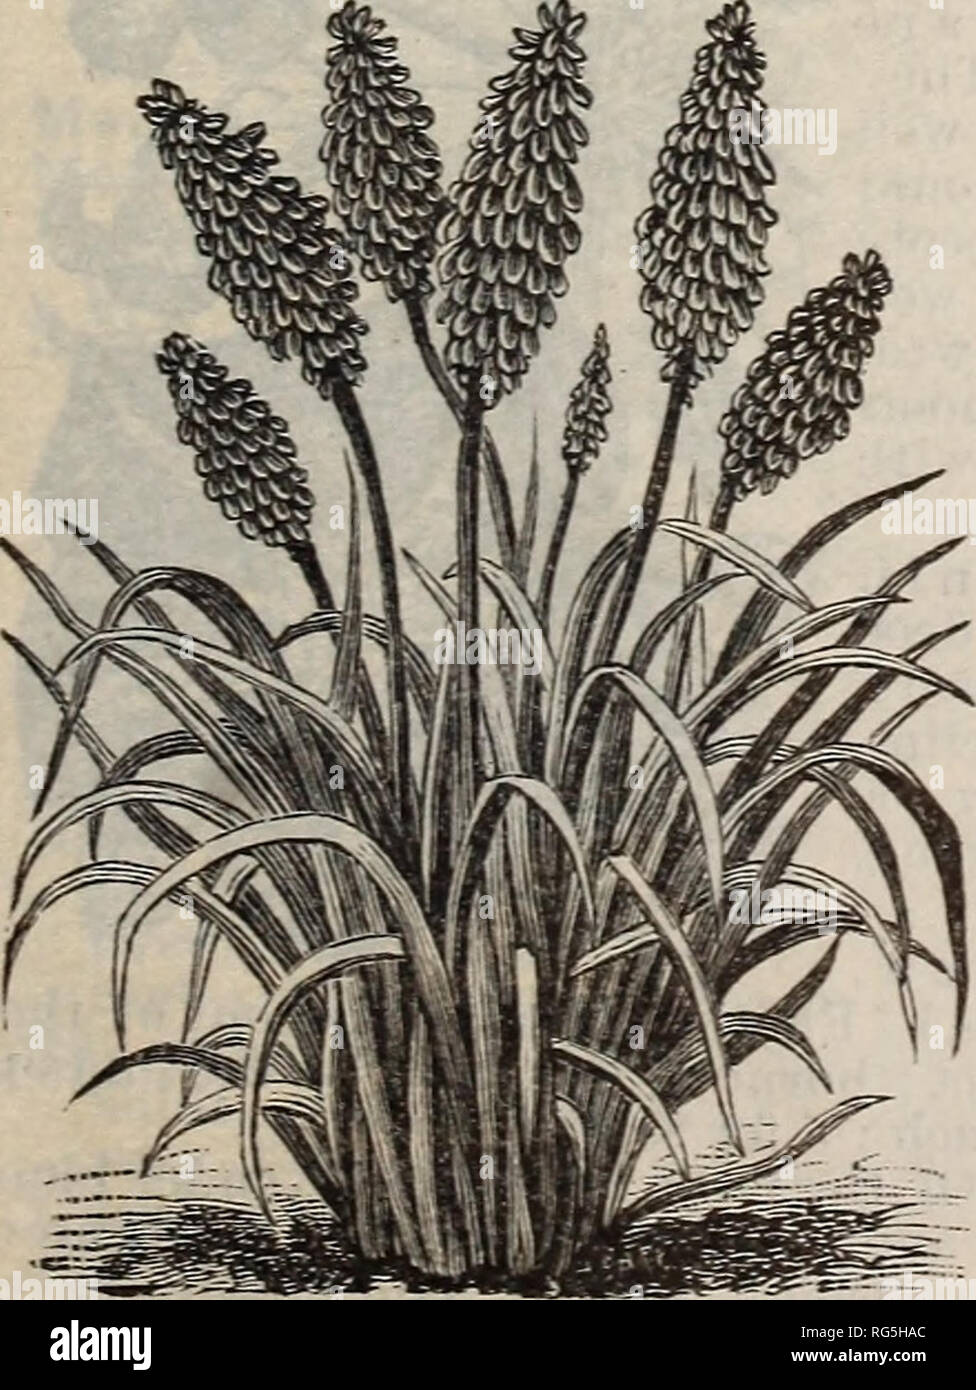 . Burpee's farm annual, 1892. Nursery stock Pennsylvania Philadelphia Catalogs; Flowers Catalogs; Vegetables Catalogs; Seeds Catalogs. AMORPHOPHALLUS RIVIERI. AMORPHOPHALLUS EIVIERI. A fine suramer-floweriug bulb for tub or open-ground culture. One of the rarest and grandest of ornamental plants. Stems and stalks green, spotted rose ; leaves de- compound and often four feet across. Flowers usually a yard in length, the projecting spadix being dark red and the spathe rosy green. 45 cts. each; 3 for ^1.25. LILY OF THE VALLEY. FOR WINTER OR SPRING BLOOMING. &quot;We offer strong imported pips, wh Stock Photo